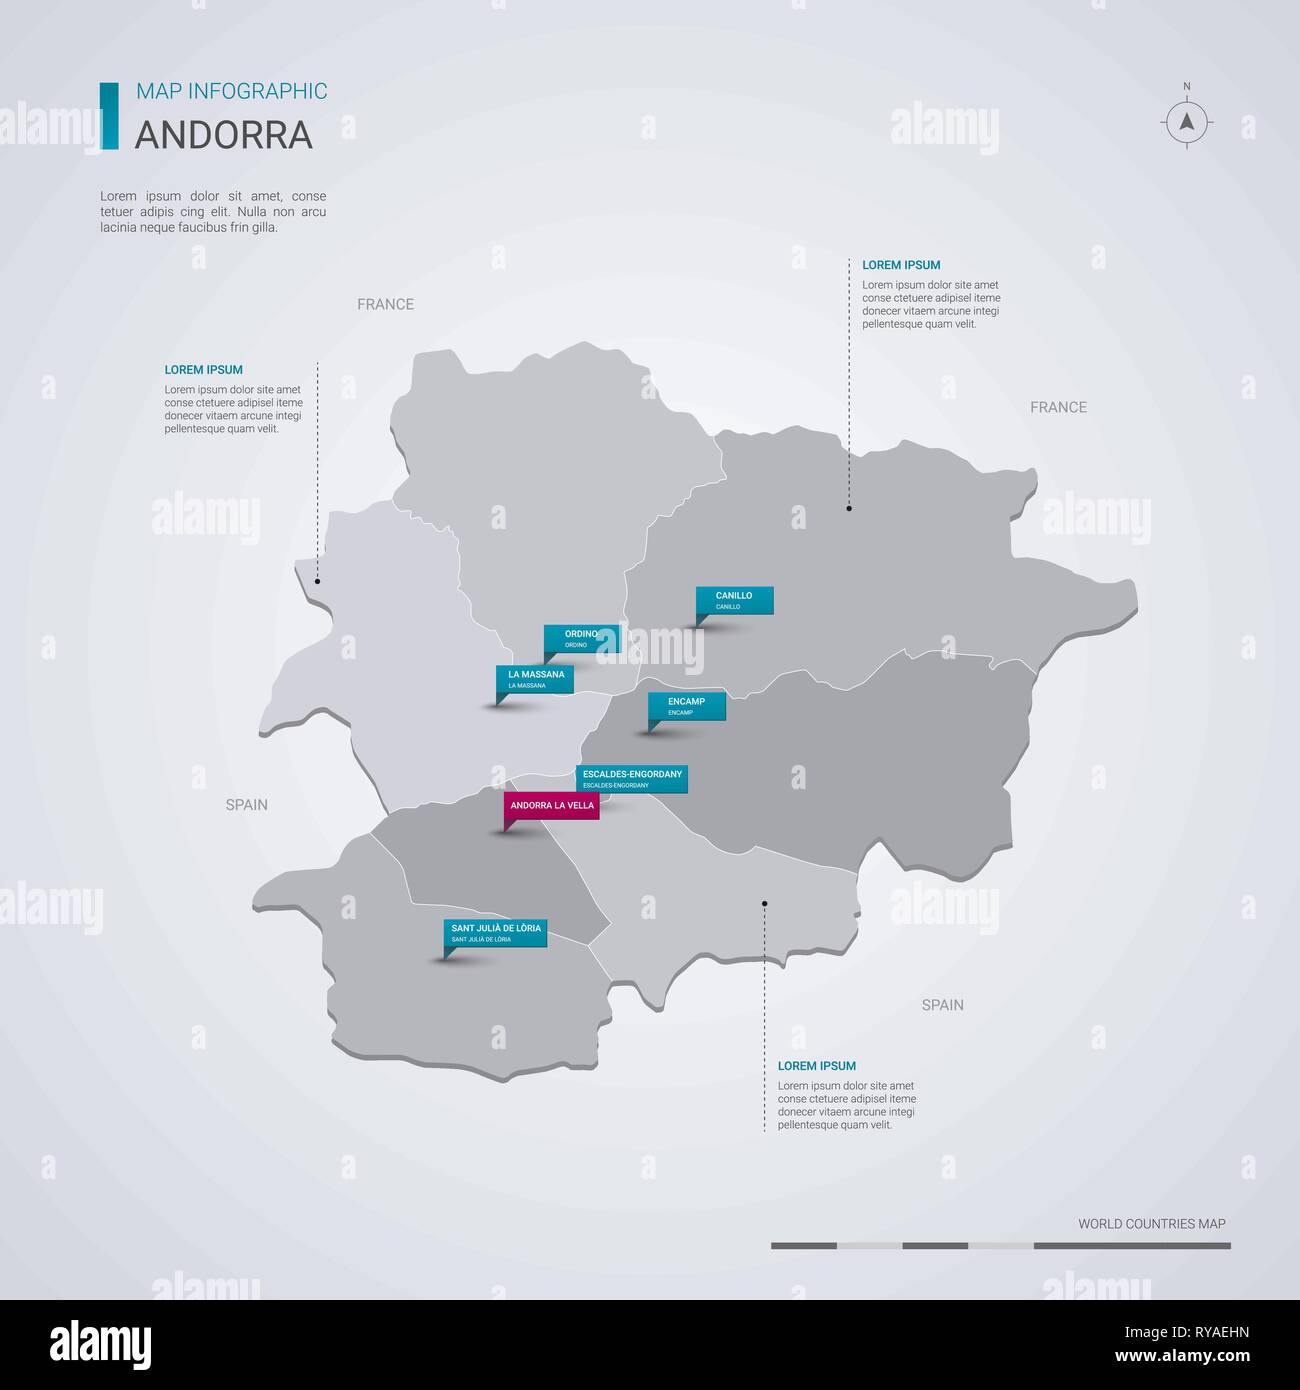 Andorra vector map with infographic elements, pointer marks. Editable template with regions, cities and capital Andorra la Vella. Stock Vector